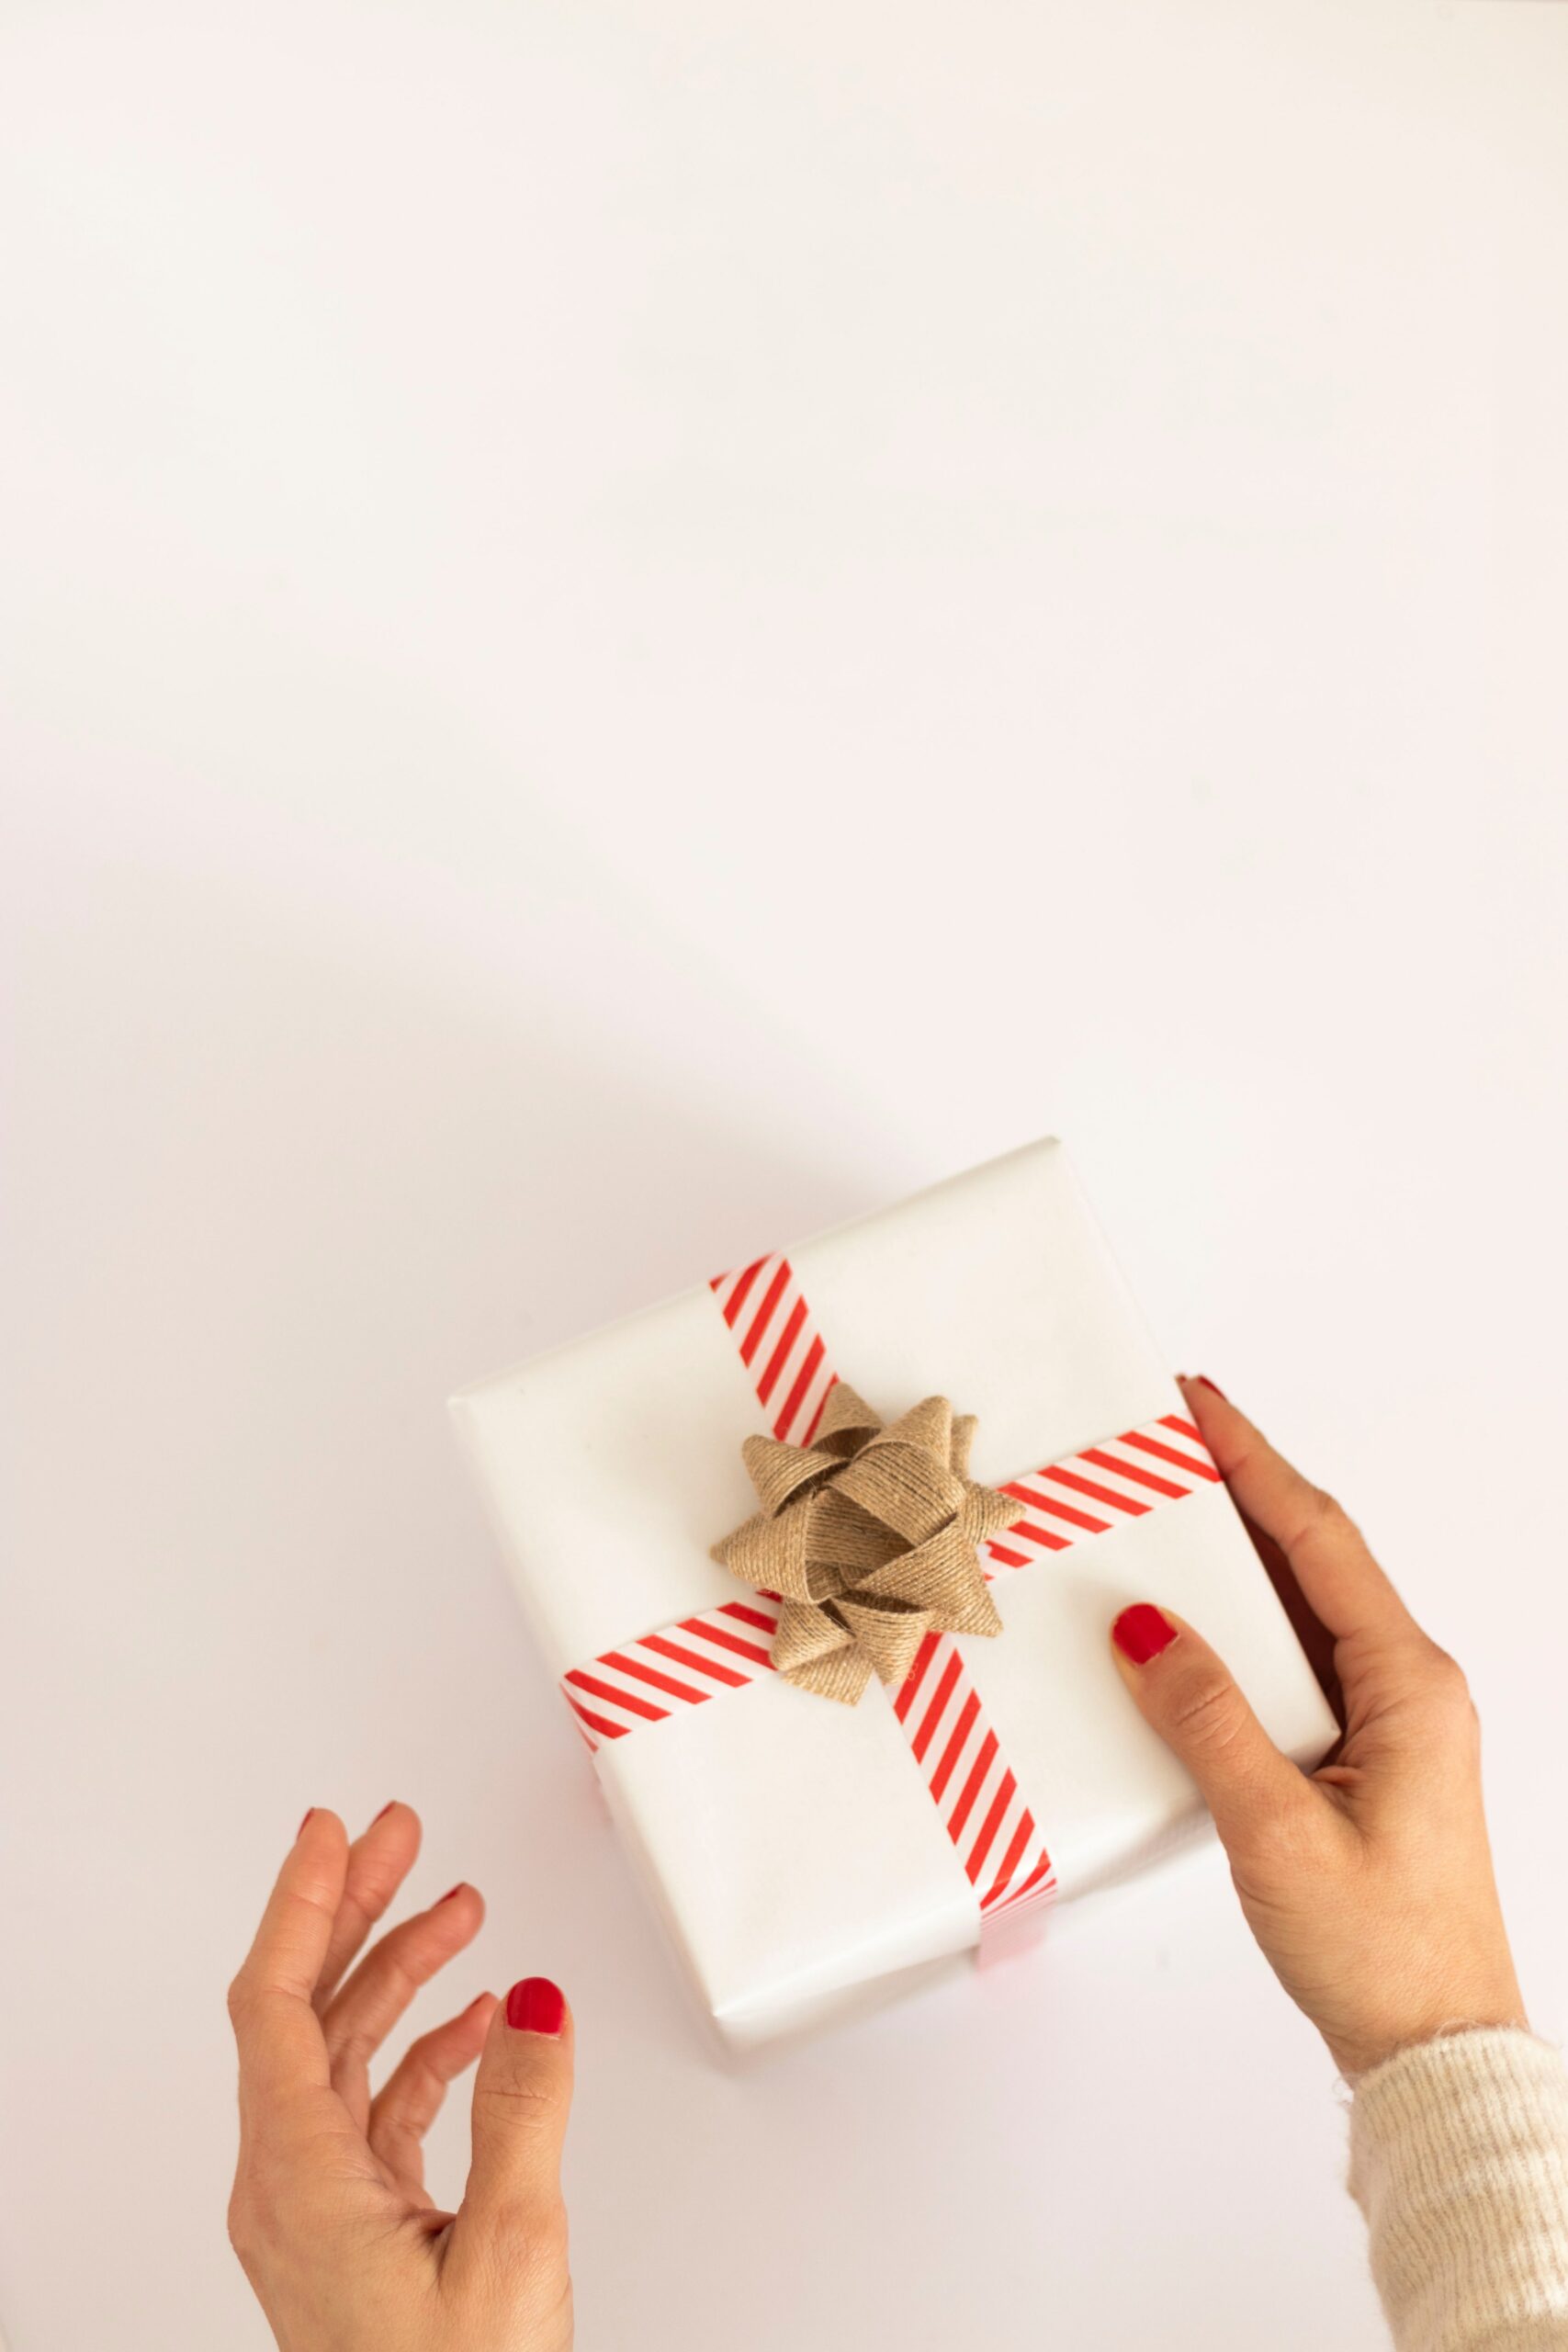 Two hands reach out for a present laying on a white surface and as seen as shot from above. The present has white wrapping paper with a red-and-white trim wrapped around it and a light brown bow at the top.